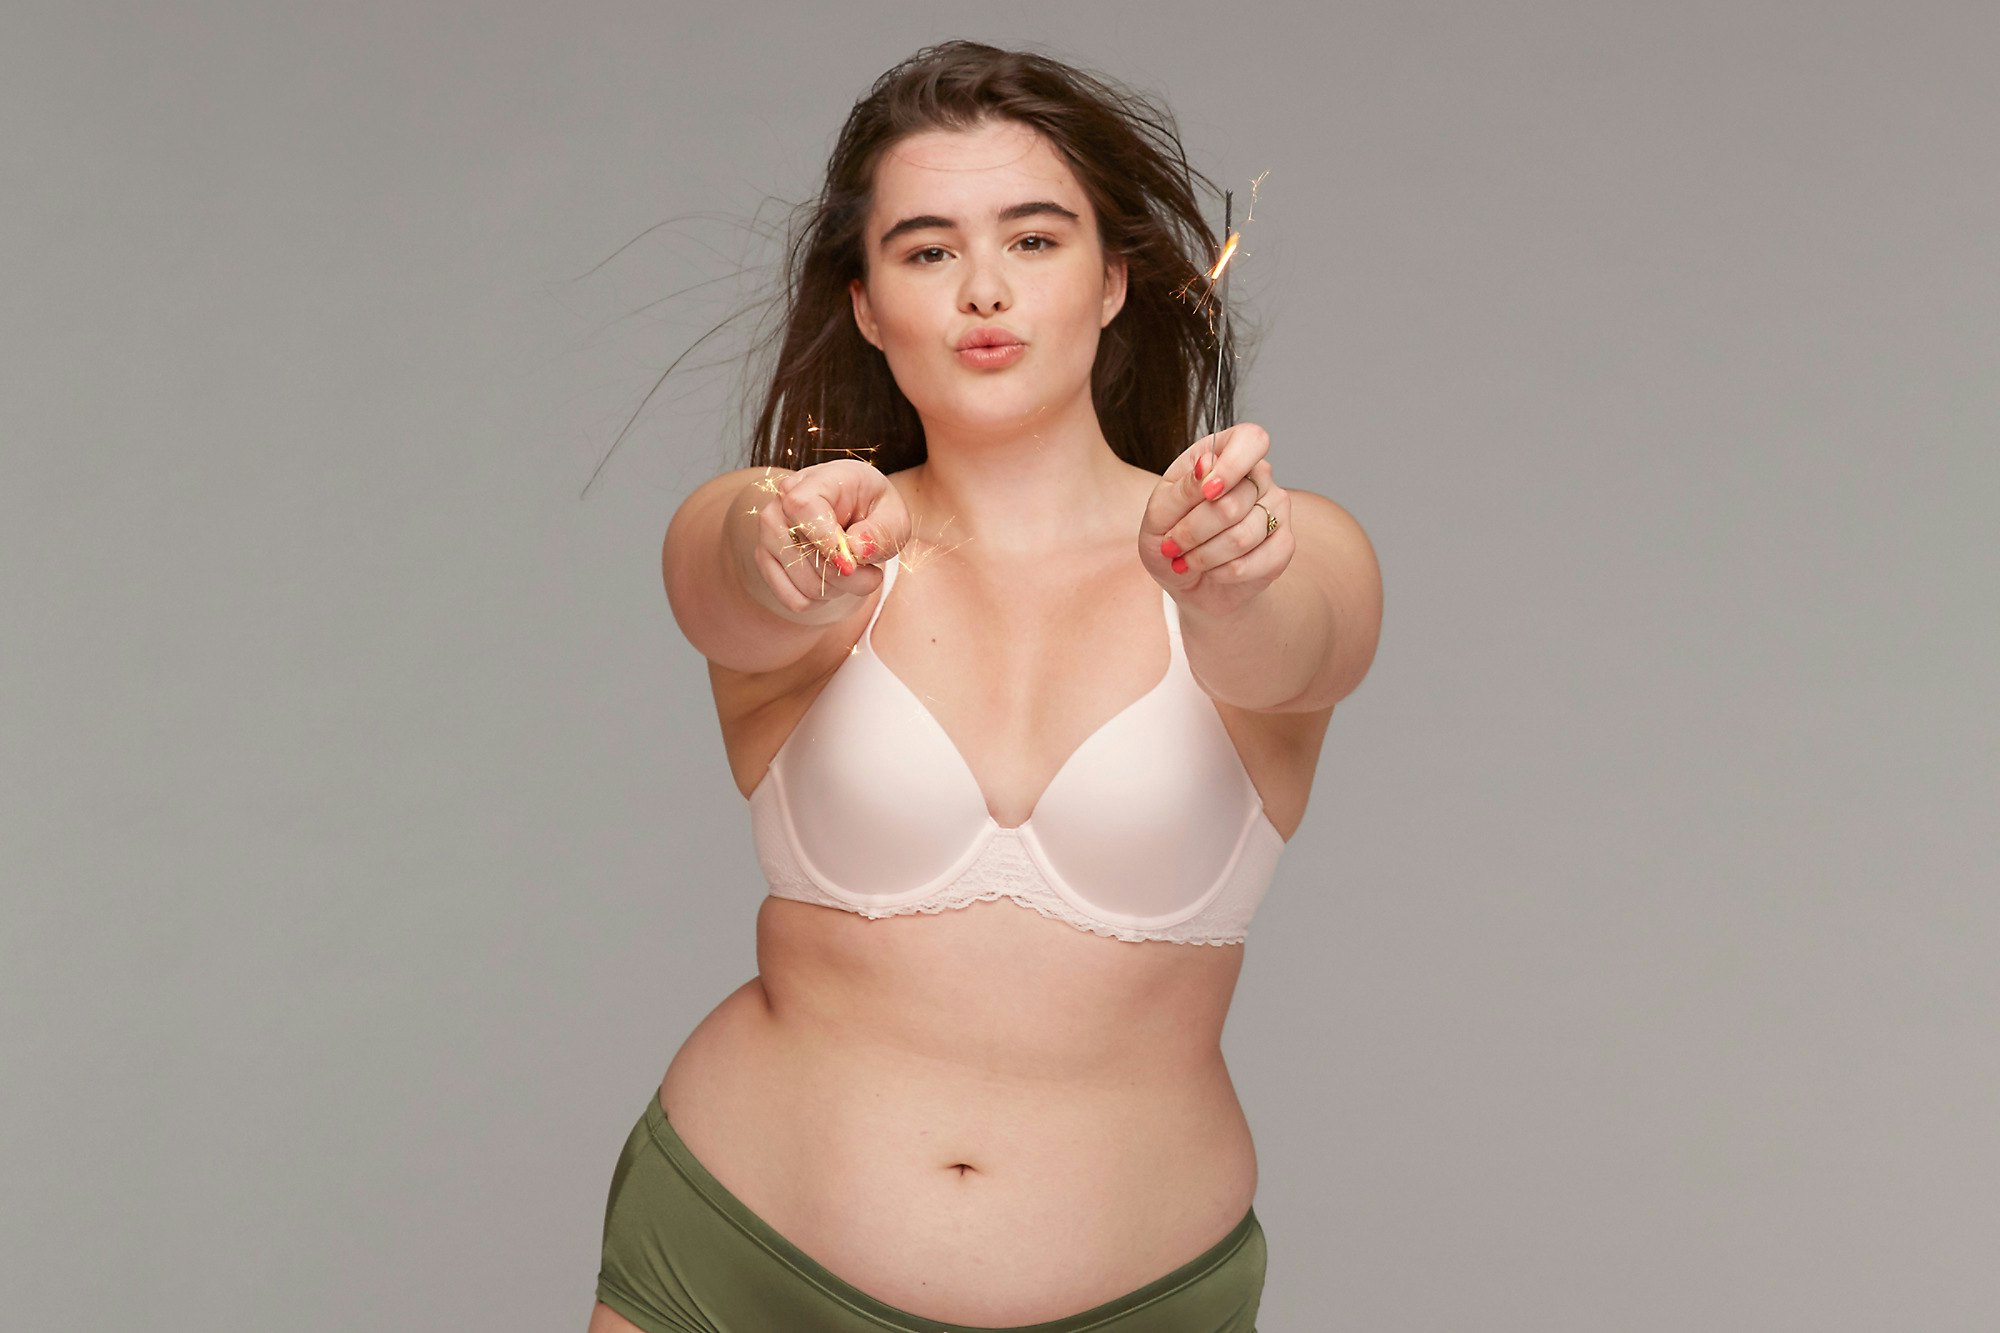 Many women have asymmetric breasts, which is totally normal! Make sure  you're wearing the right bra size for optimal comfort and suppor